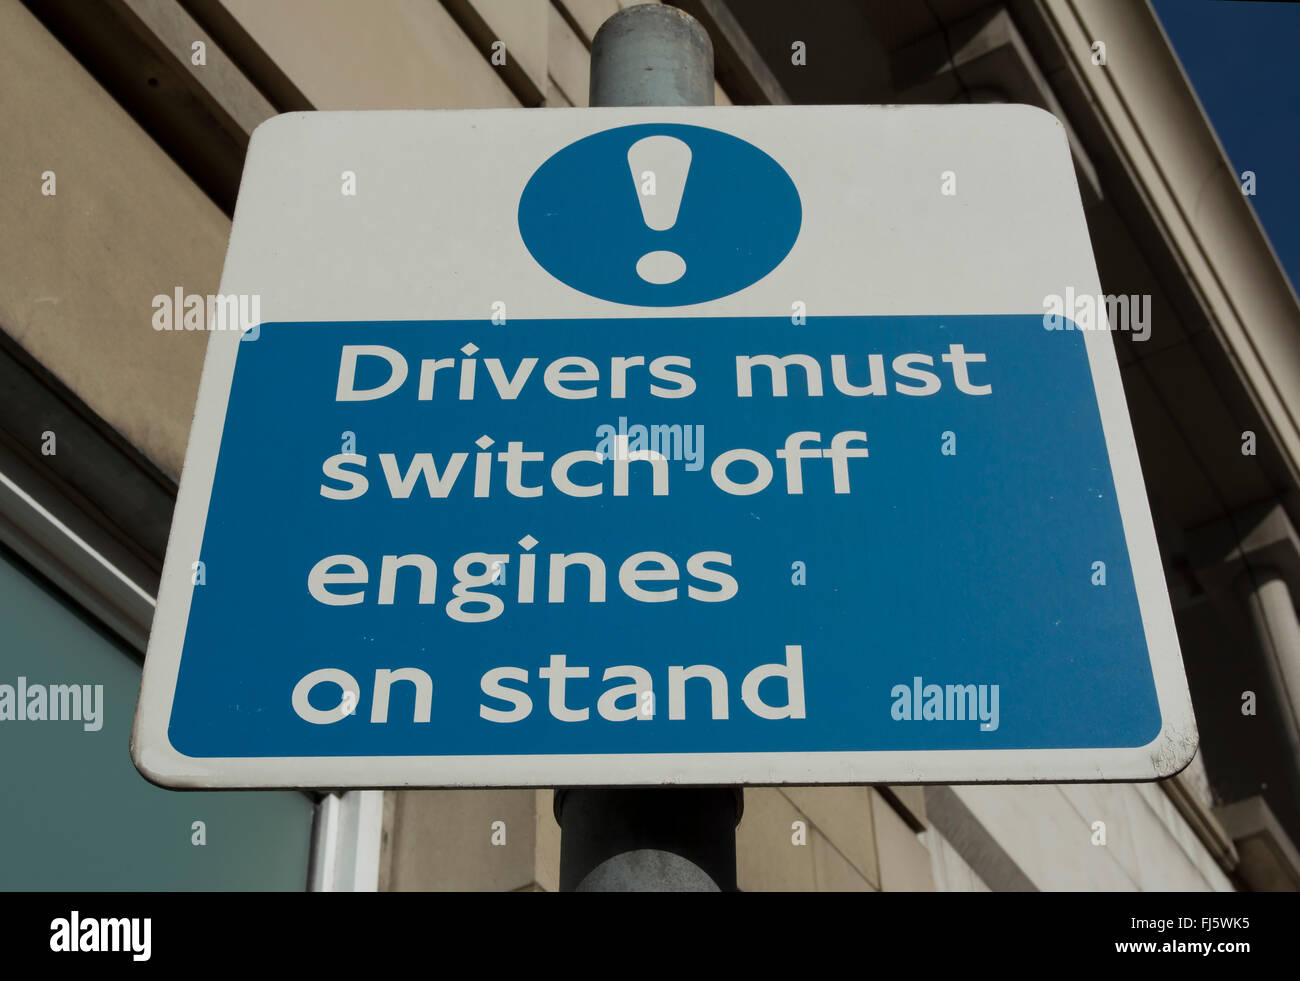 british road sign warning drivers to switch off engines on stand Stock Photo